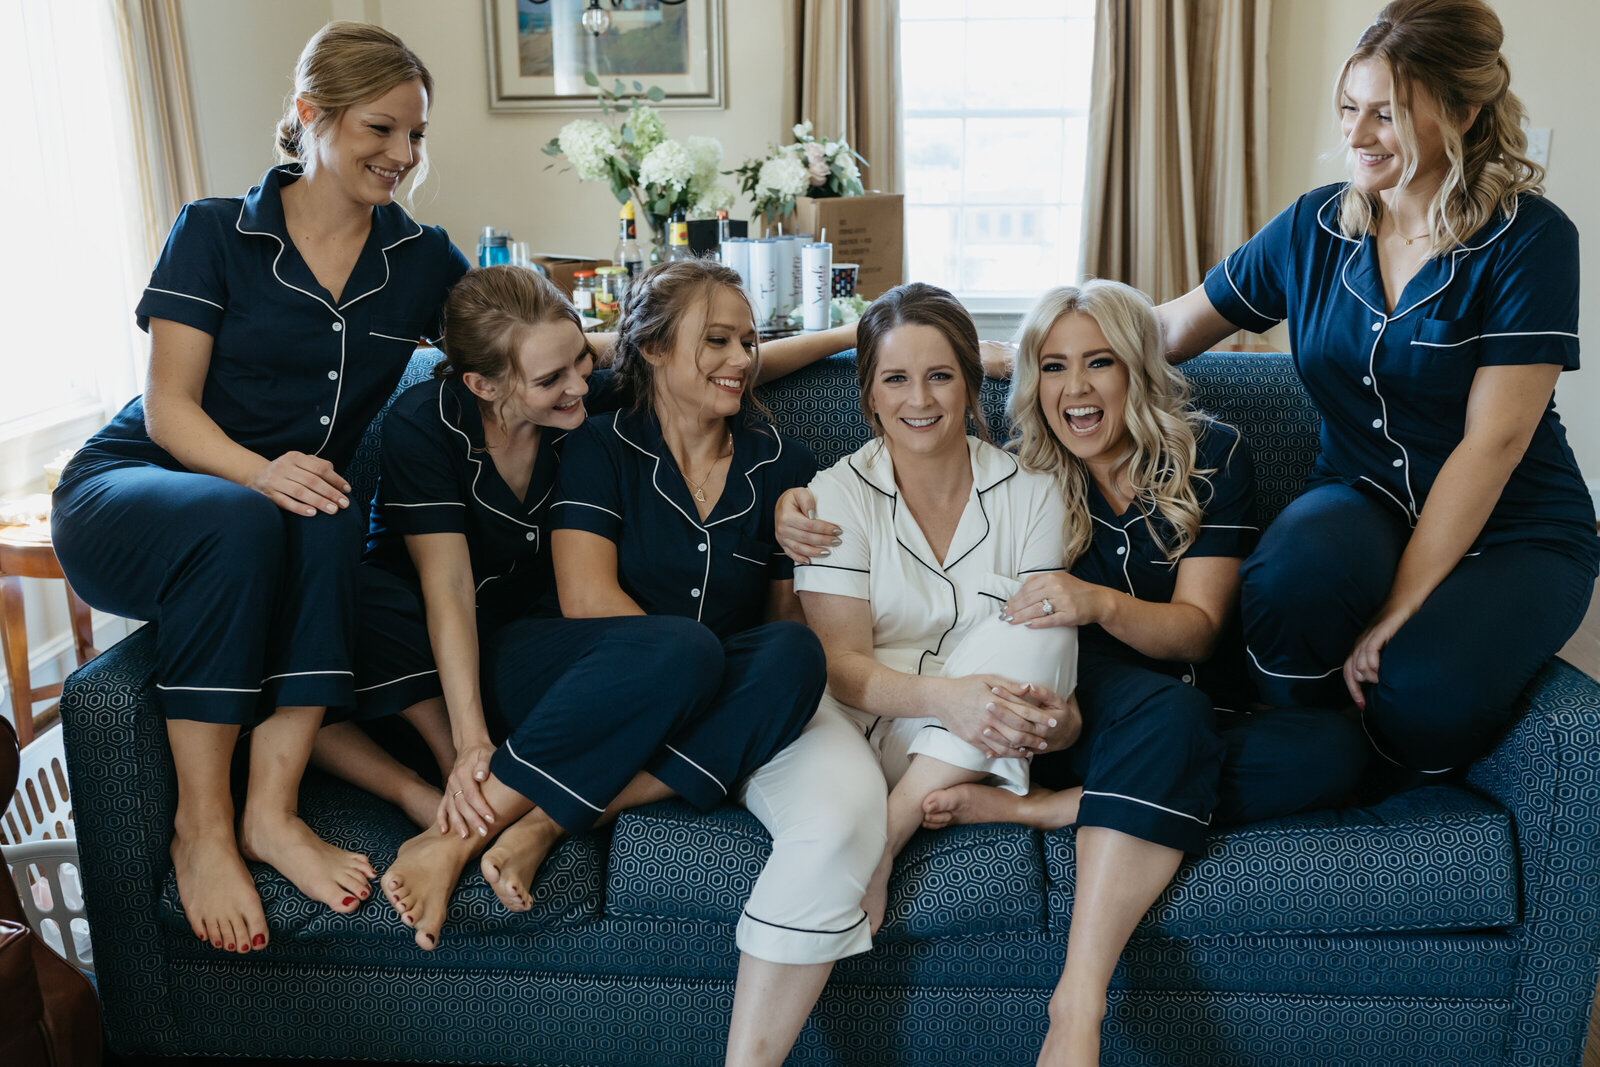 A bride and her bridesmaids sit together in matching pajamas